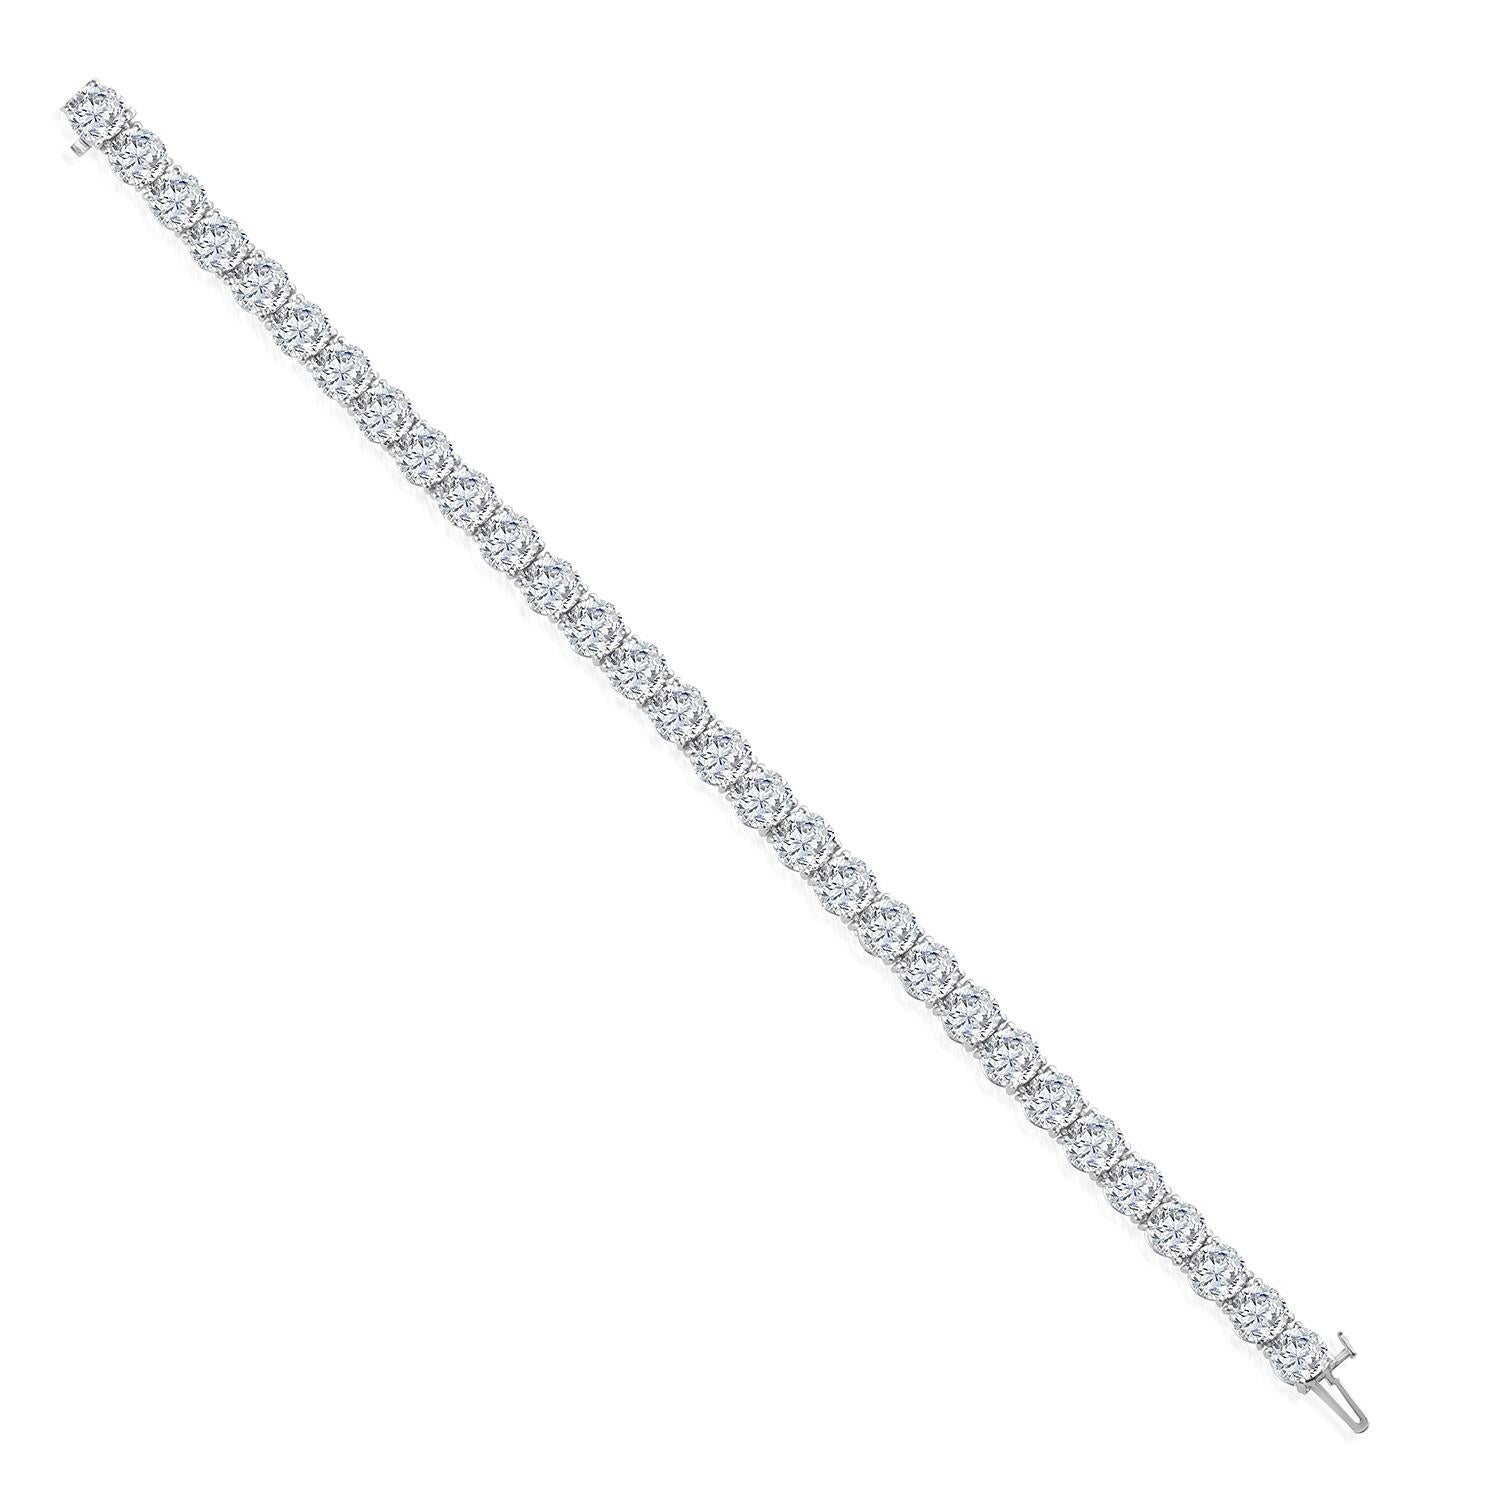 This gorgeous diamond tennis bracelet weighing 8.73 total carat weight set in hand made 18k white gold. Featuring ideal brilliant round cut diamonds ,for maximum brilliance. The incredible diamonds are F-G color and SI1 clarity.
Bracelet mesures 7